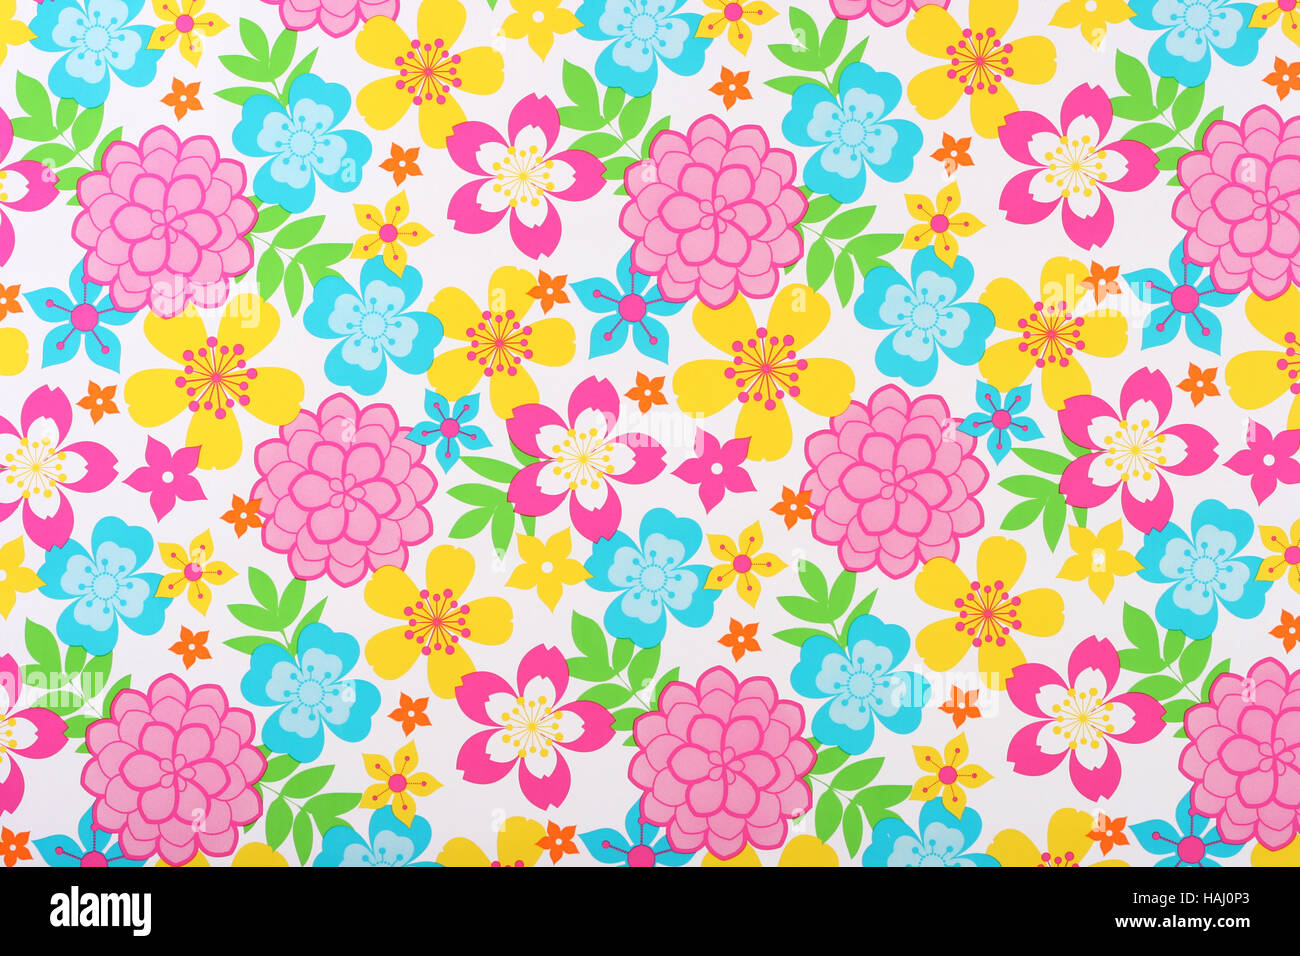 colorful floral background Stock Photo